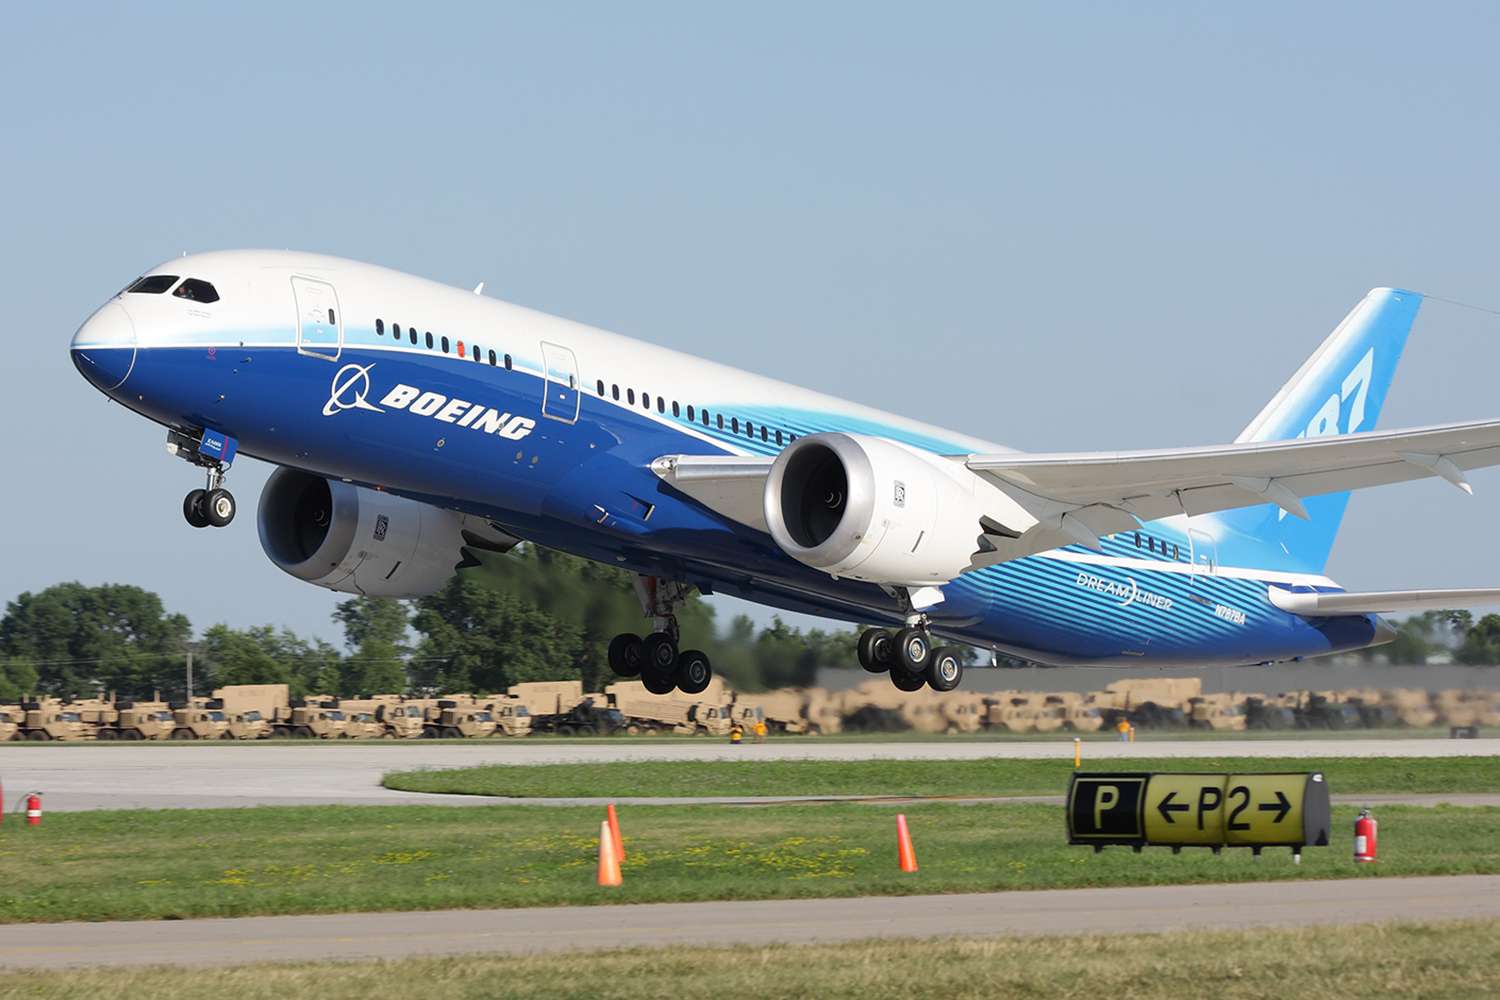 Boeing Whistleblower Reportedly Claims 787 Planes Could Break Apart Mid-Air Due to Construction Flaws [Video]